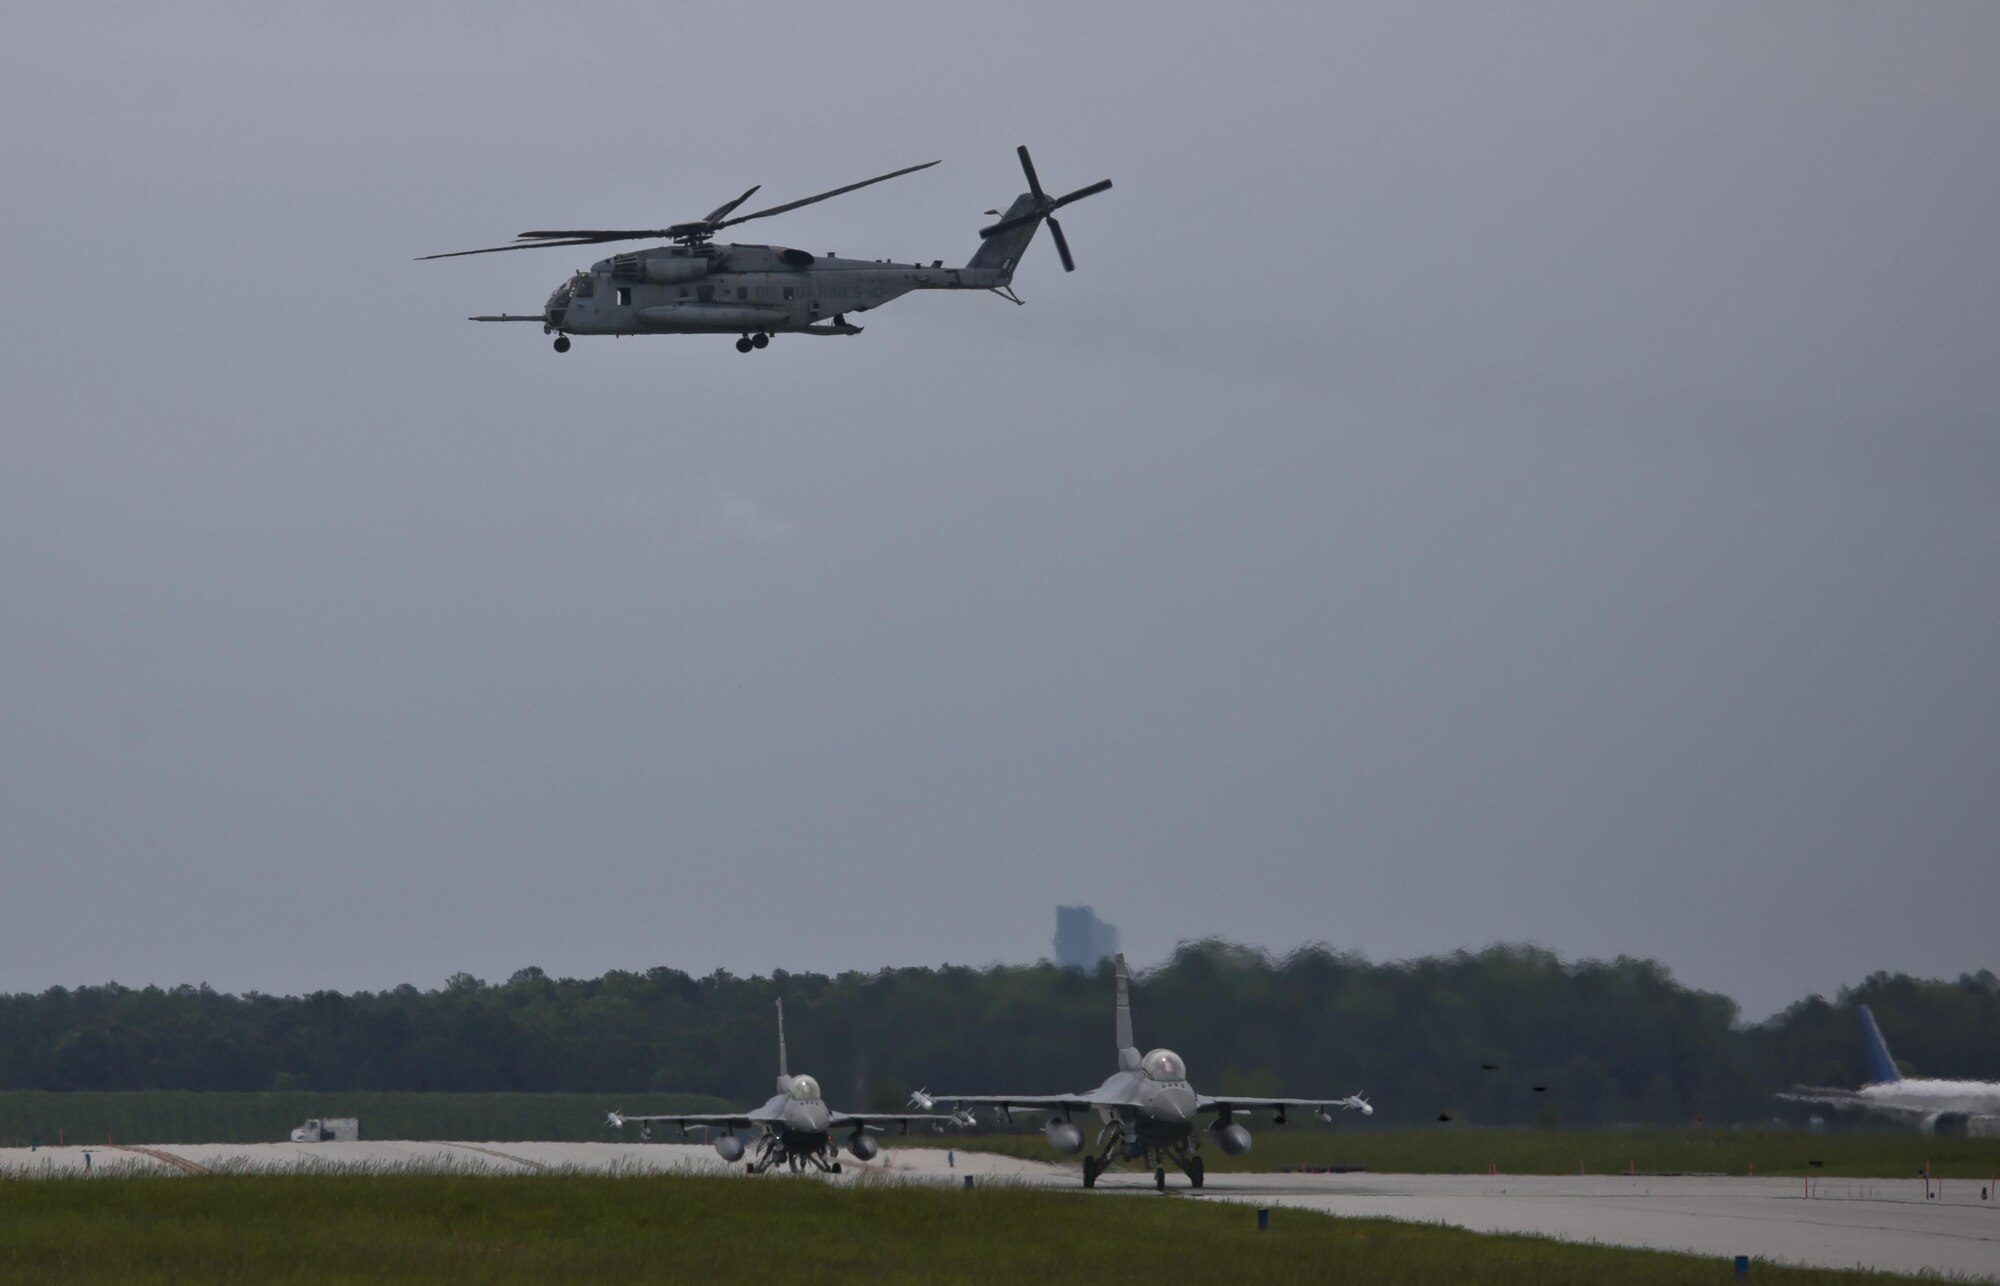 South Carolina Air National Guard F-16D Fighting Falcons from the 169th Fighter Wing taxi for take off during a three-day Aeropsace Control Alert CrossTell live-fly training exercise at Atlantic City Air National Guard Base, N.J., May 23, 2017. Representatives from the Air National Guard fighter wings, Civil Air Patrol, and U.S. Coast Guard rotary-wing air intercept units will conduct daily sorties from May 23-25 to hone their skills with tactical-level air-intercept procedures. (U.S. Air National Guard photo by Master Sgt. Matt Hecht/Released)